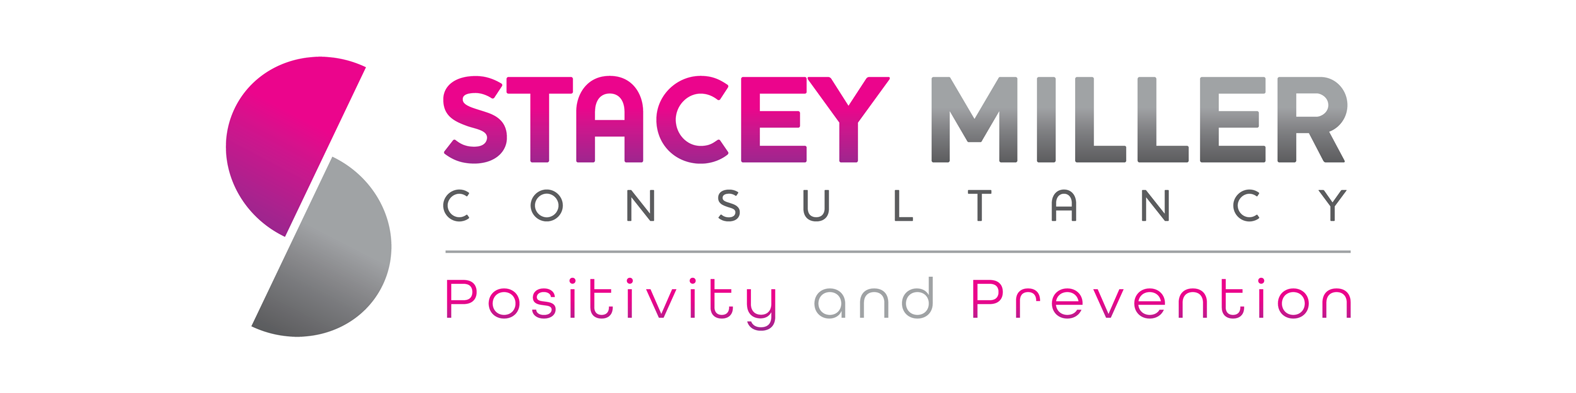 Stacey Miller Consultancy | Substance Misuse, Mental Health and Domestic Abuse Education and Training Consultant